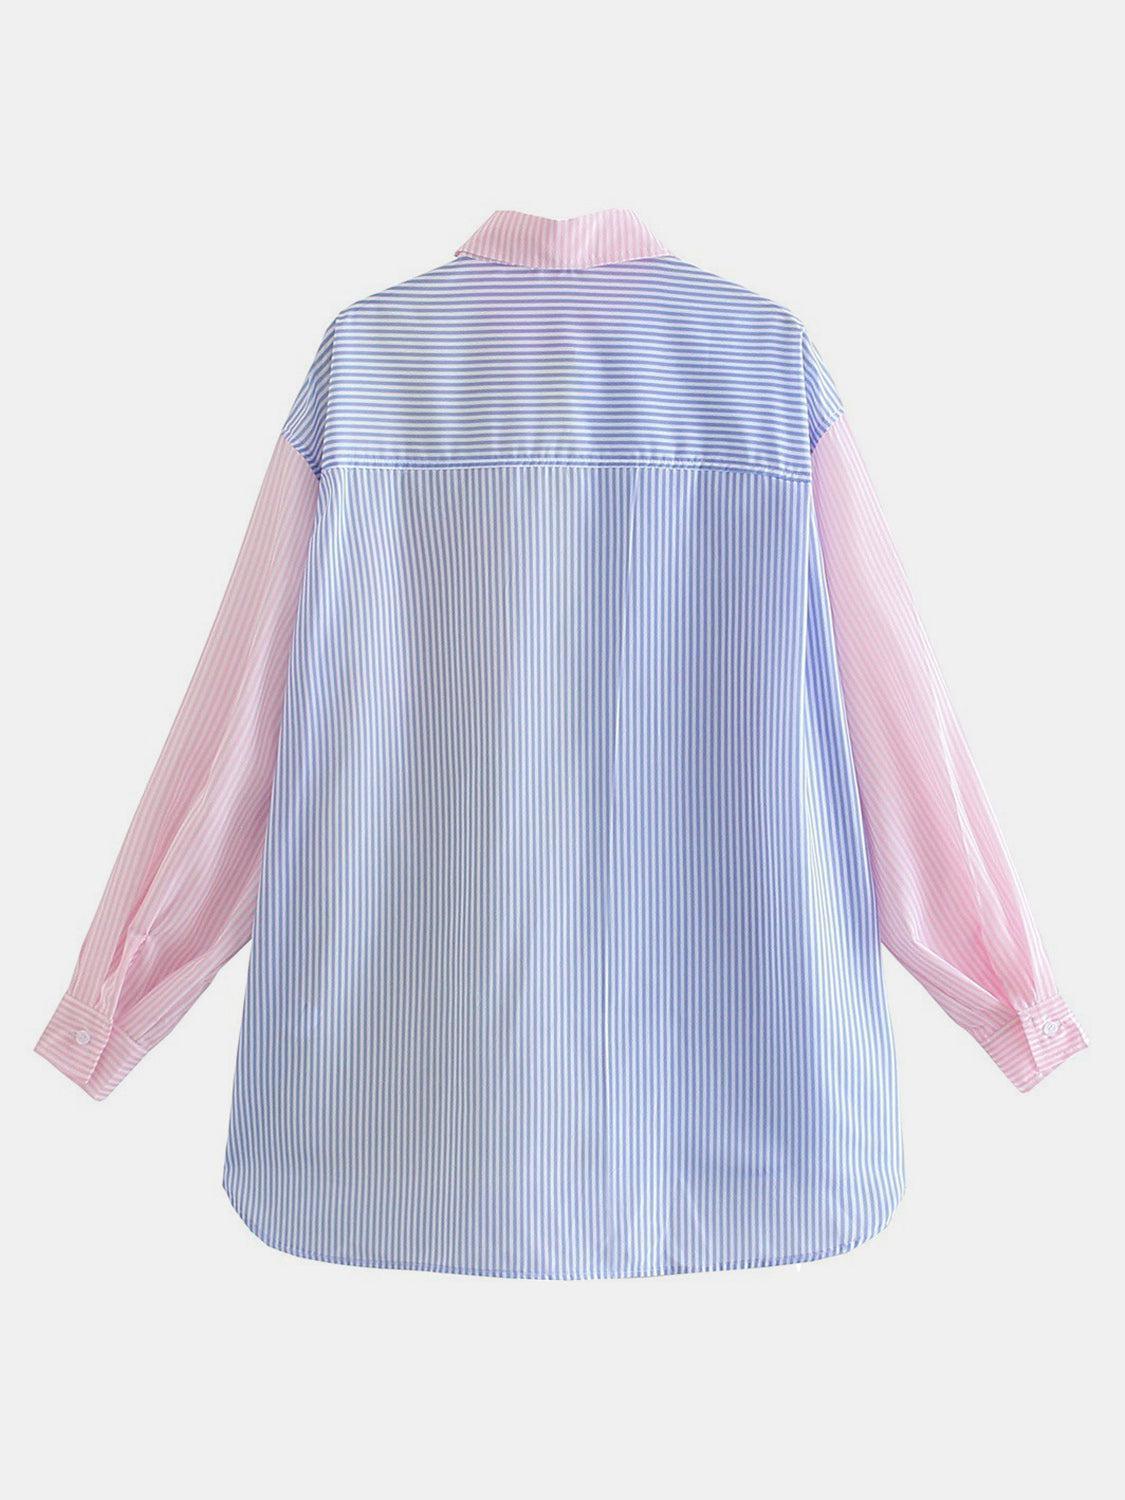 a blue and white striped shirt with pink sleeves